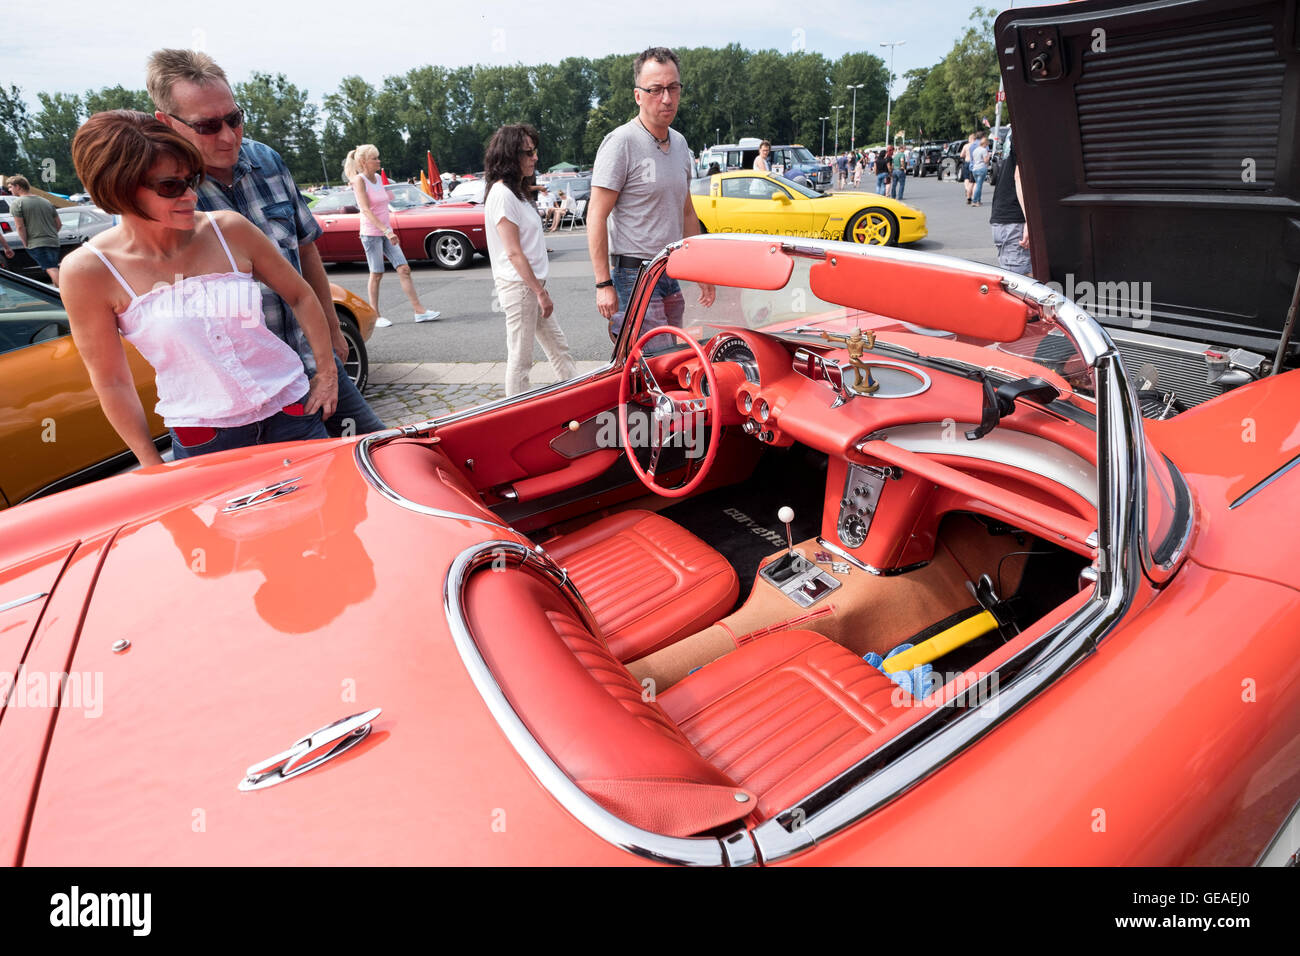 People looking at an old Corvette at the 'Street Mag Show' in Hanover, Germany, 24 July 2016. On 23 and 24 July, many classics of American automotive history will be shown on the Schuetzenplatz in Hannover at the 'Street Mag Show'. Photo: PETER STEFFEN/dpa Stock Photo